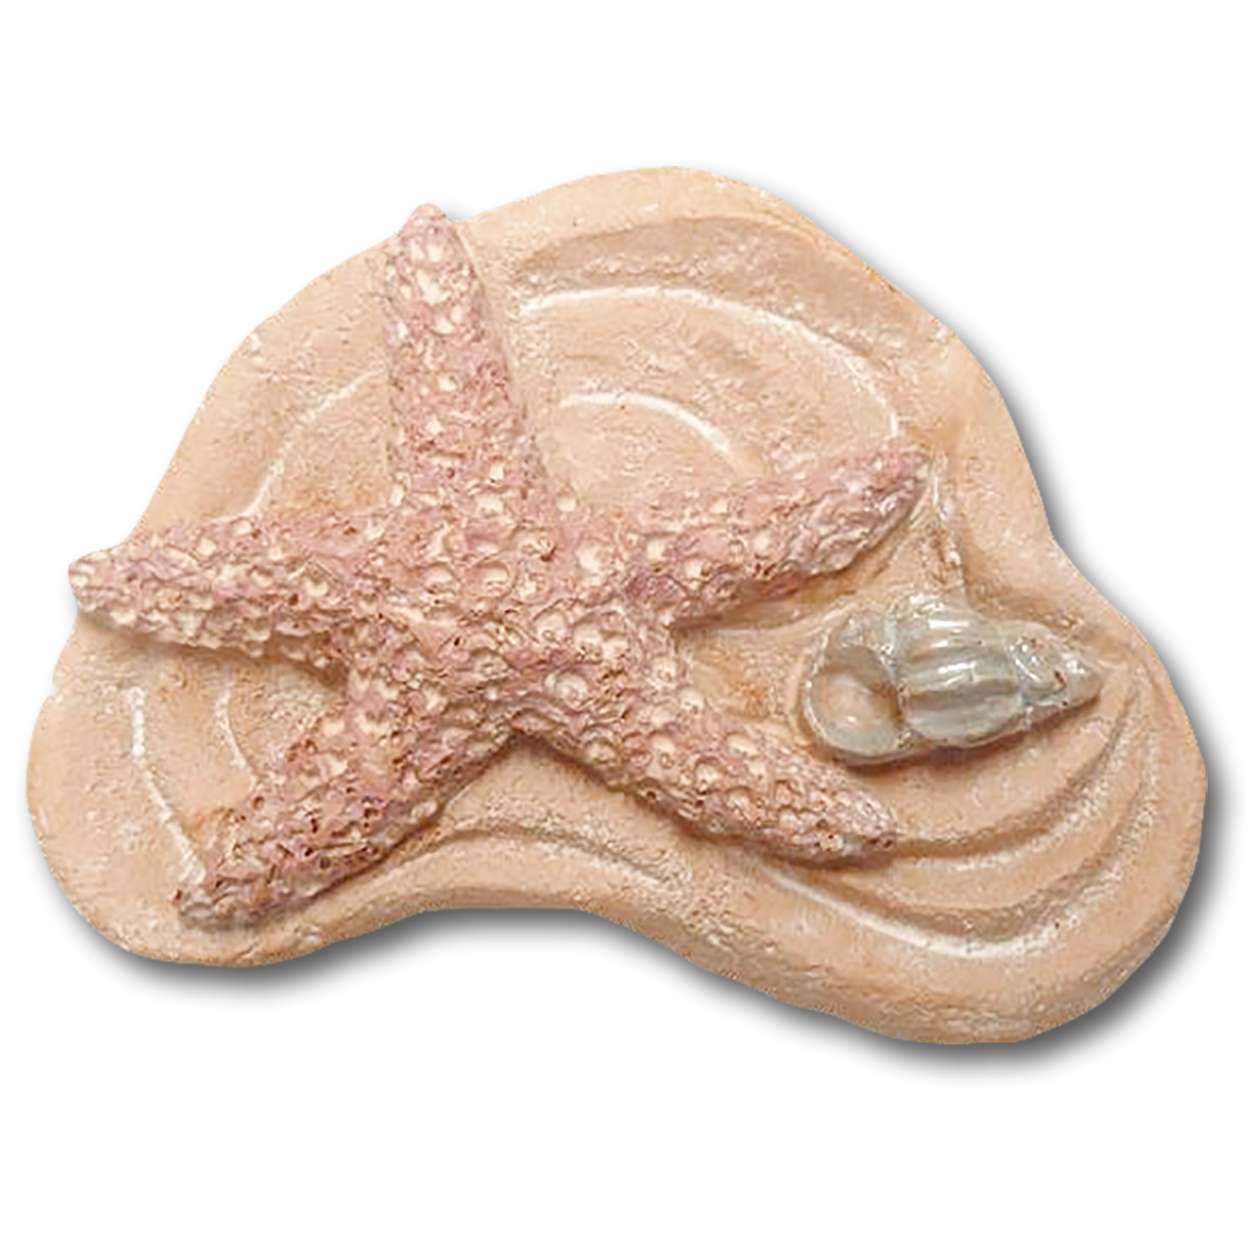 DP157 - Hand-Painted Drawer Knob Set of Two - Sand with Starfish